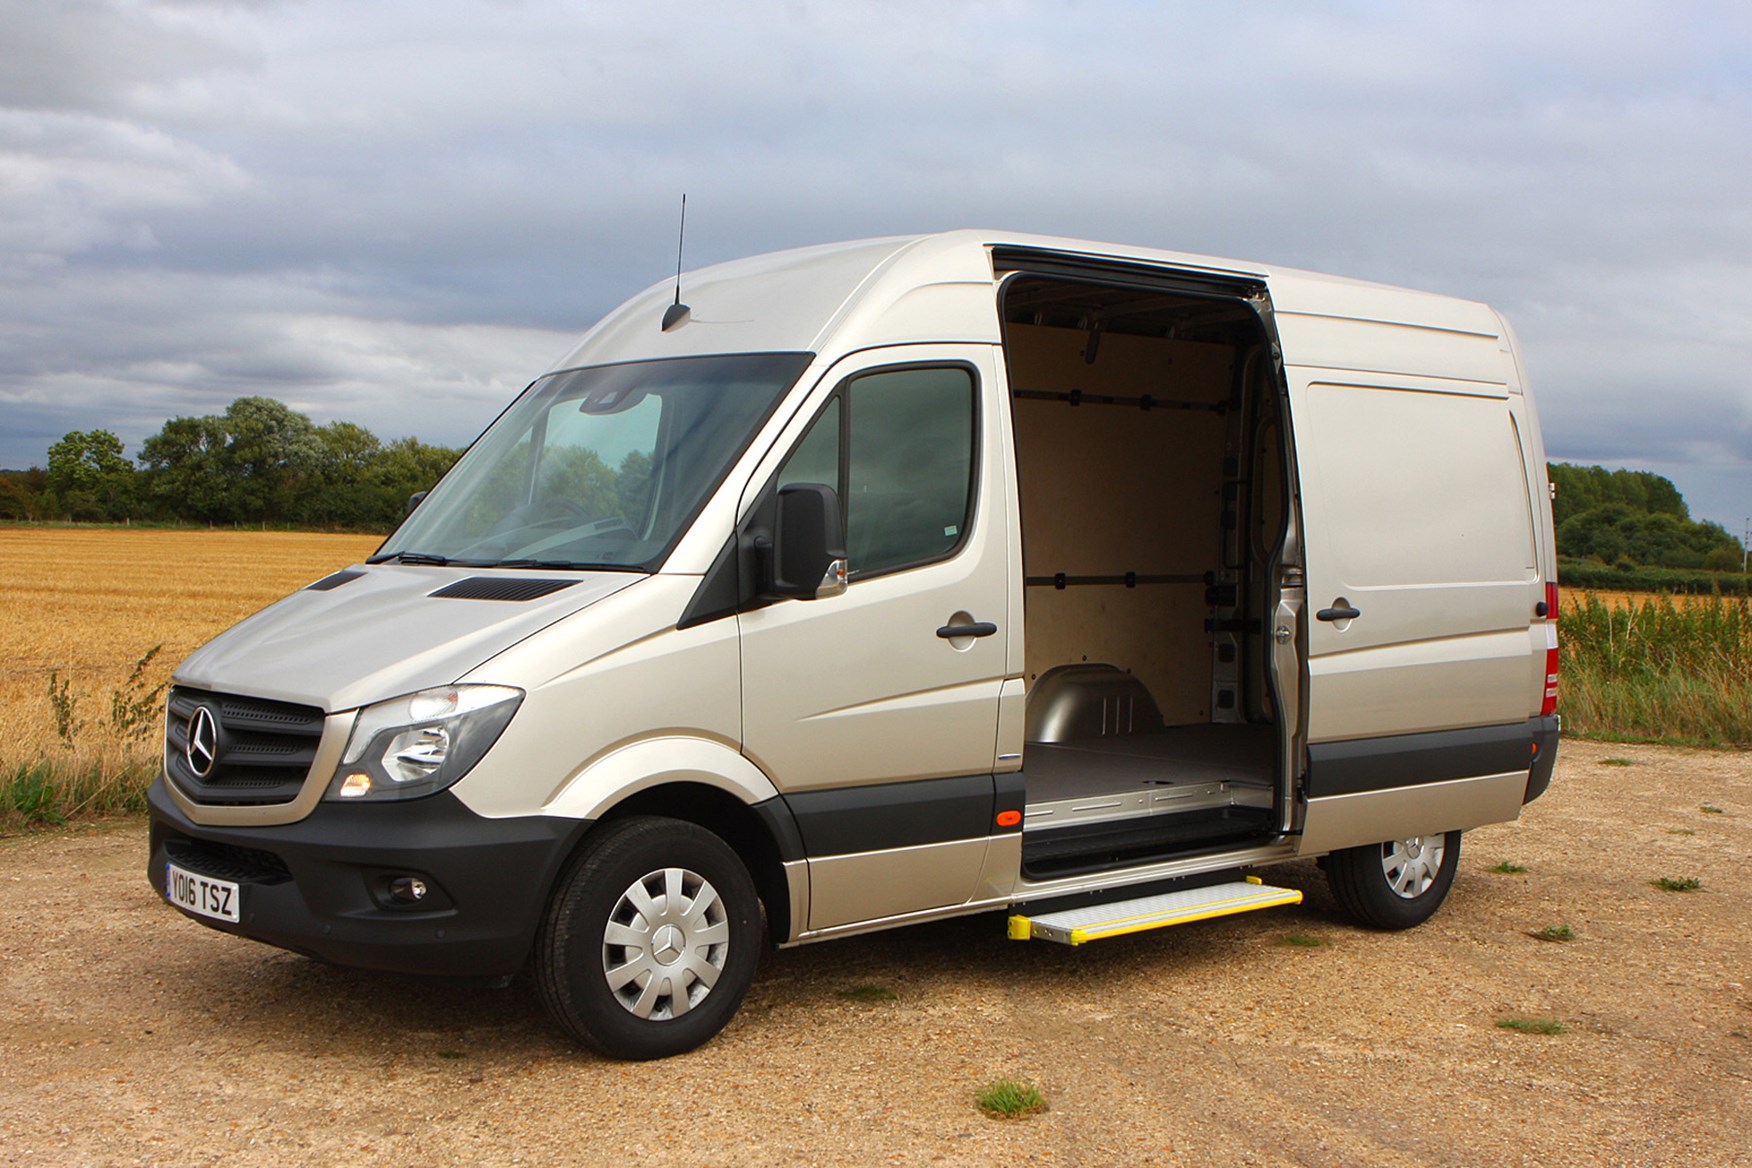 Mercedes-Benz Sprinter full review on Parkers Vans - load area